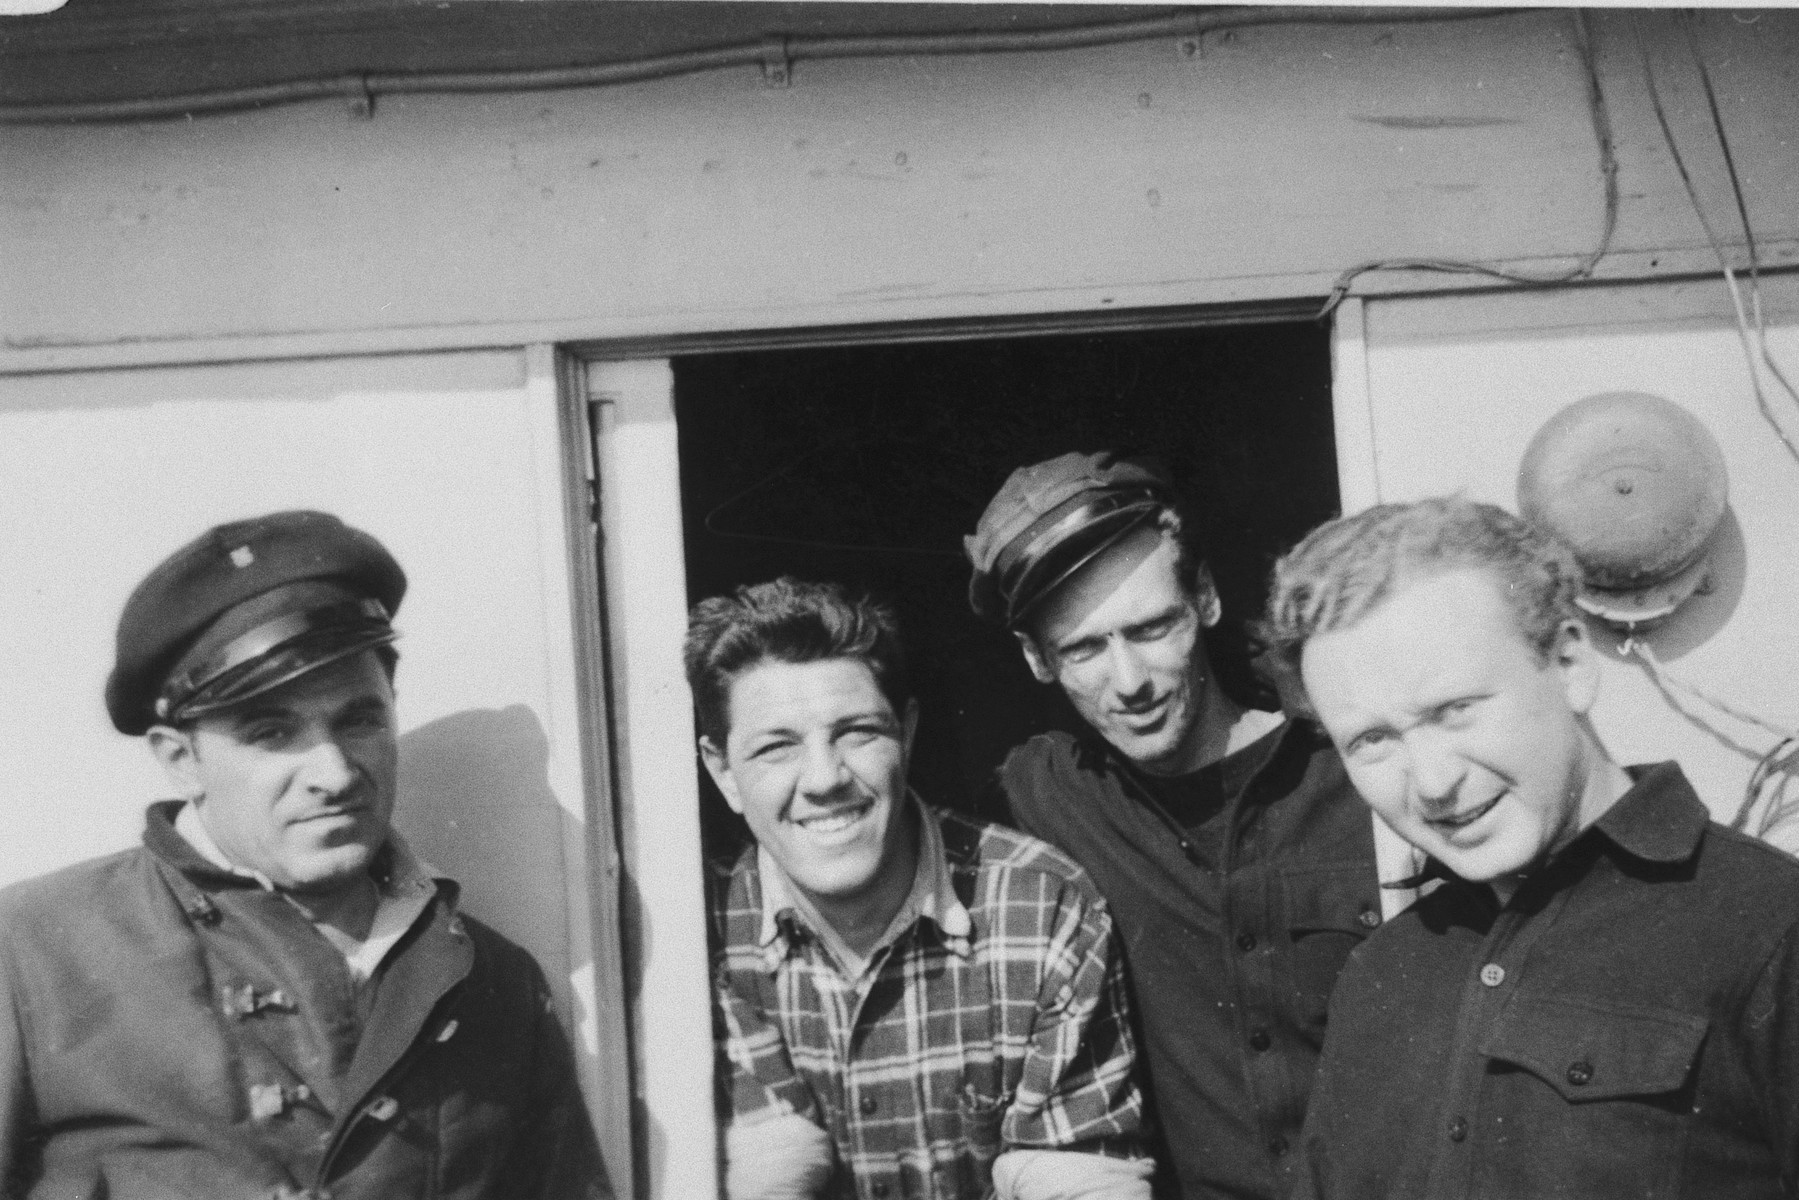 Four crew members of the President Warfield (later the Exodus 1947) pose on the deck of the ship in Baltimore harbor.

Pictured from left to right are: Mike Weiss, William Millman, Paul Yarin and William Bernstein.